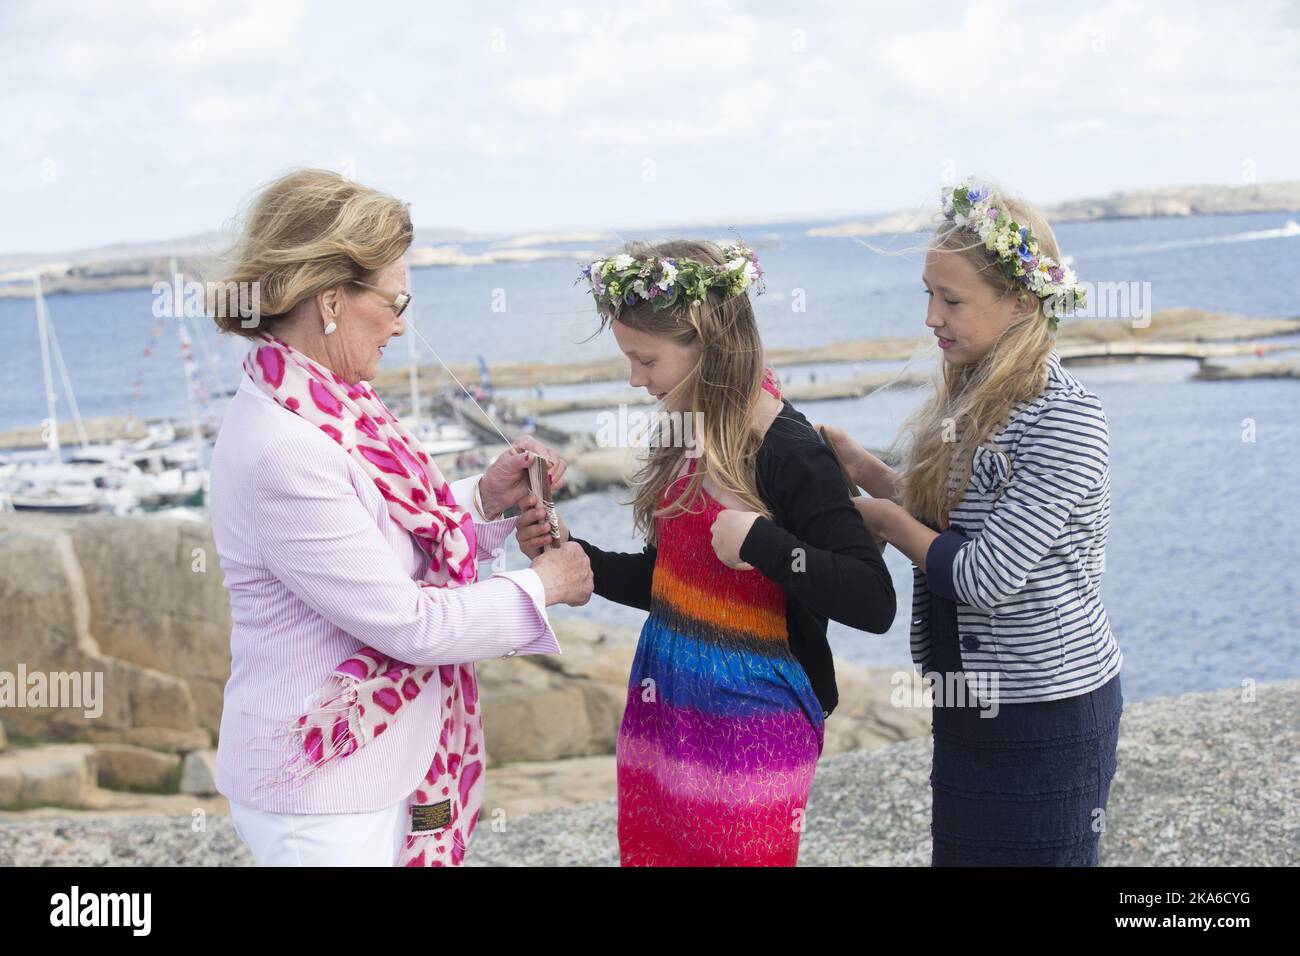 Faerder, Norway 20150627. HM Queen Sonja visits Faerder National Park at Verdens Ende on Tjoemoe. She is flying a kite with Anna Almquist and Neele Putz, both are 5th grade students at Lindhoy school. Foto: Terje Bendiksby / NTB scanpix .  Stock Photo